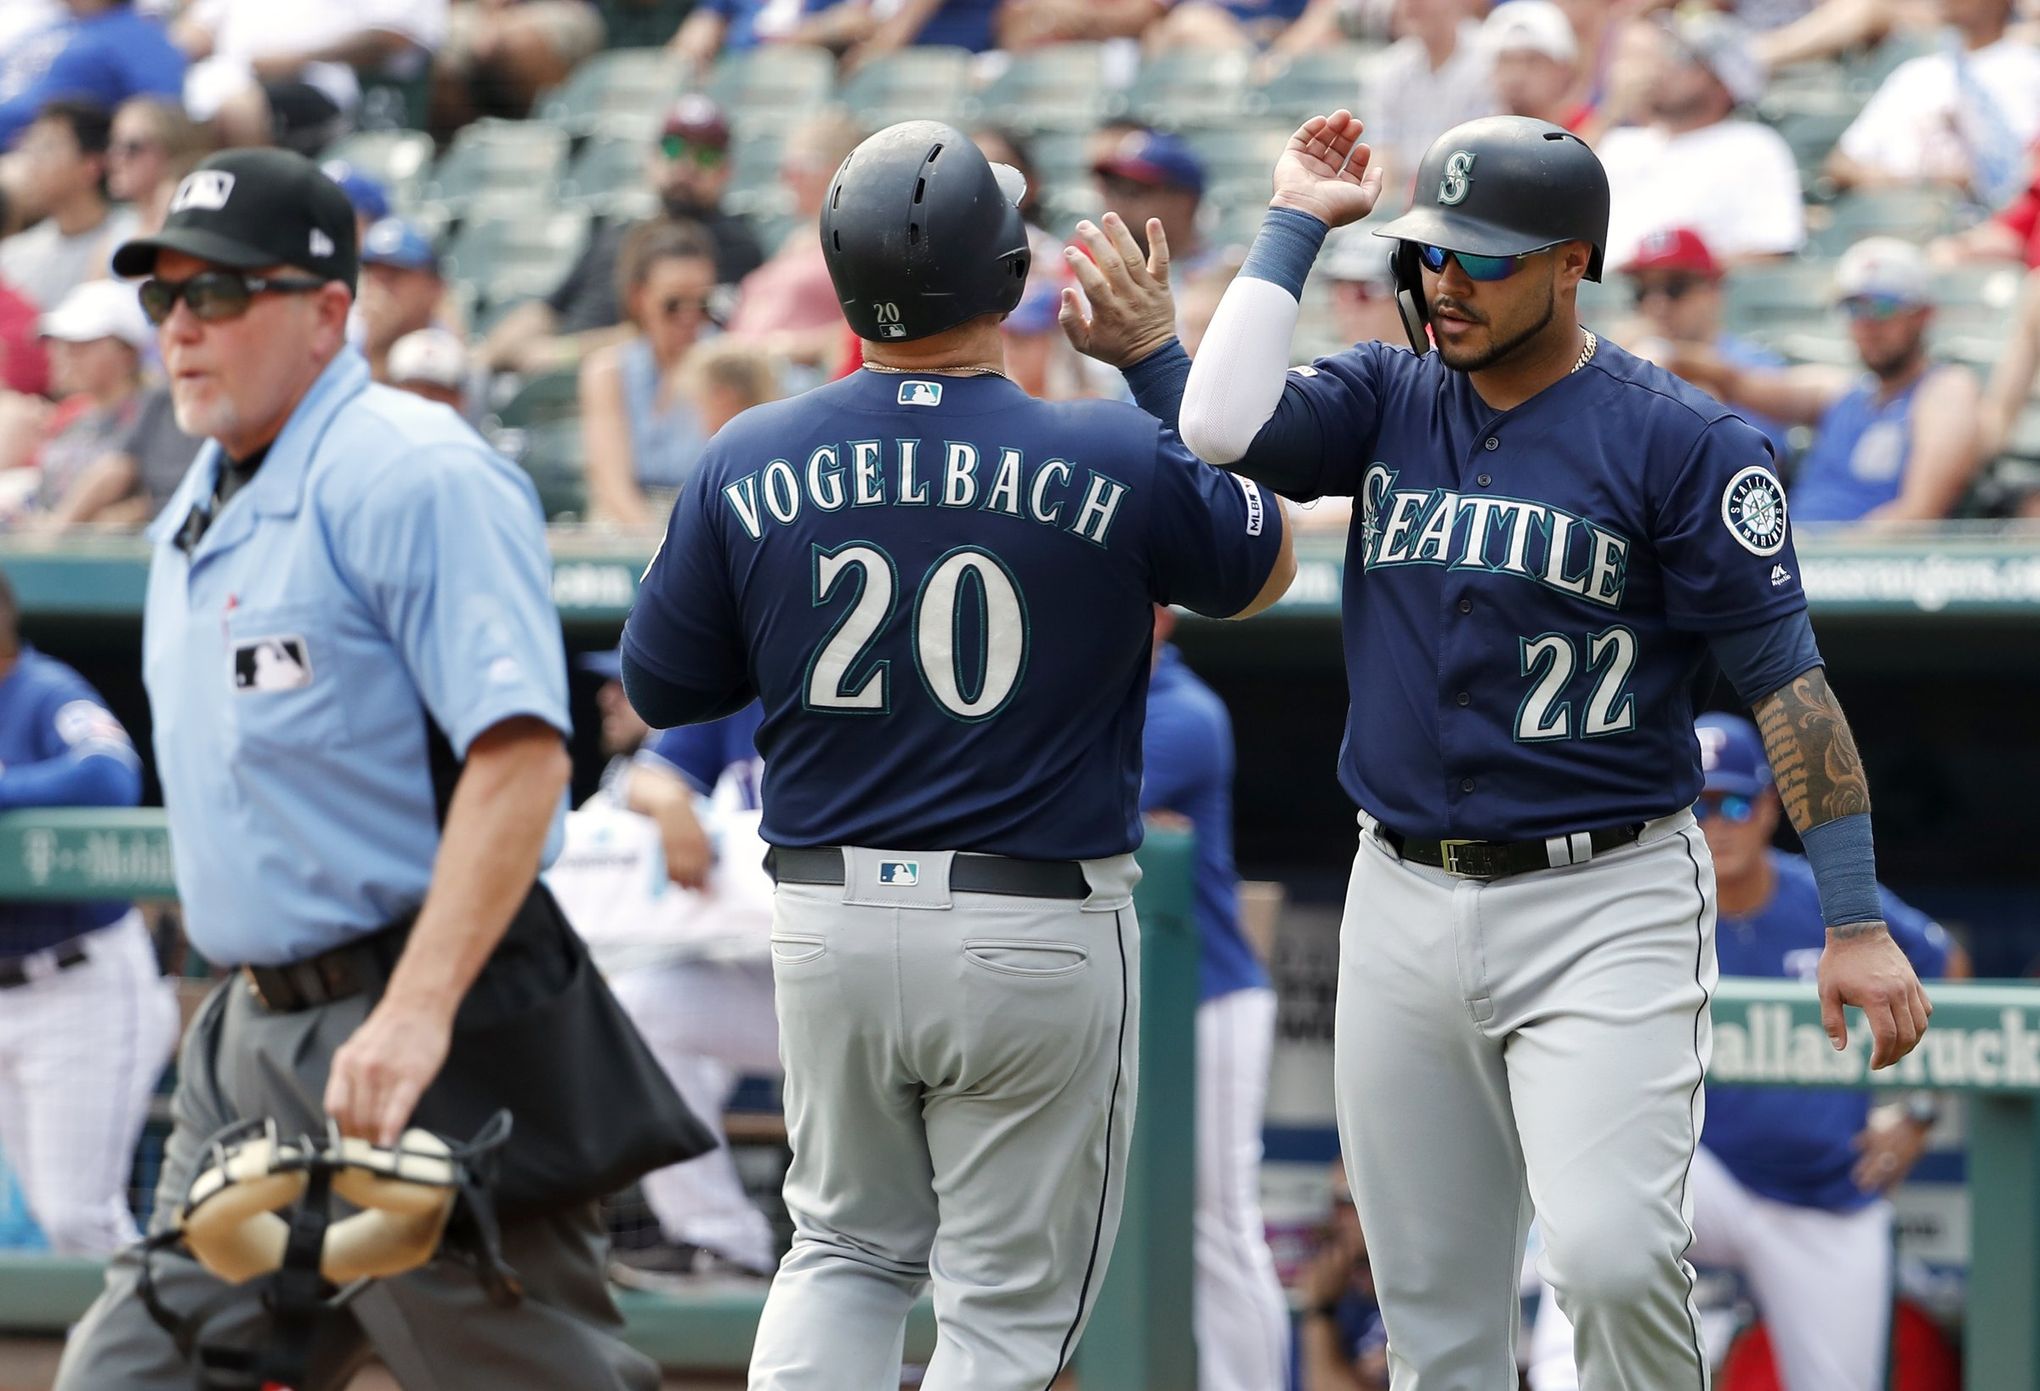 The Daily Sweat: The red-hot Mariners look to make it 8 consecutive wins